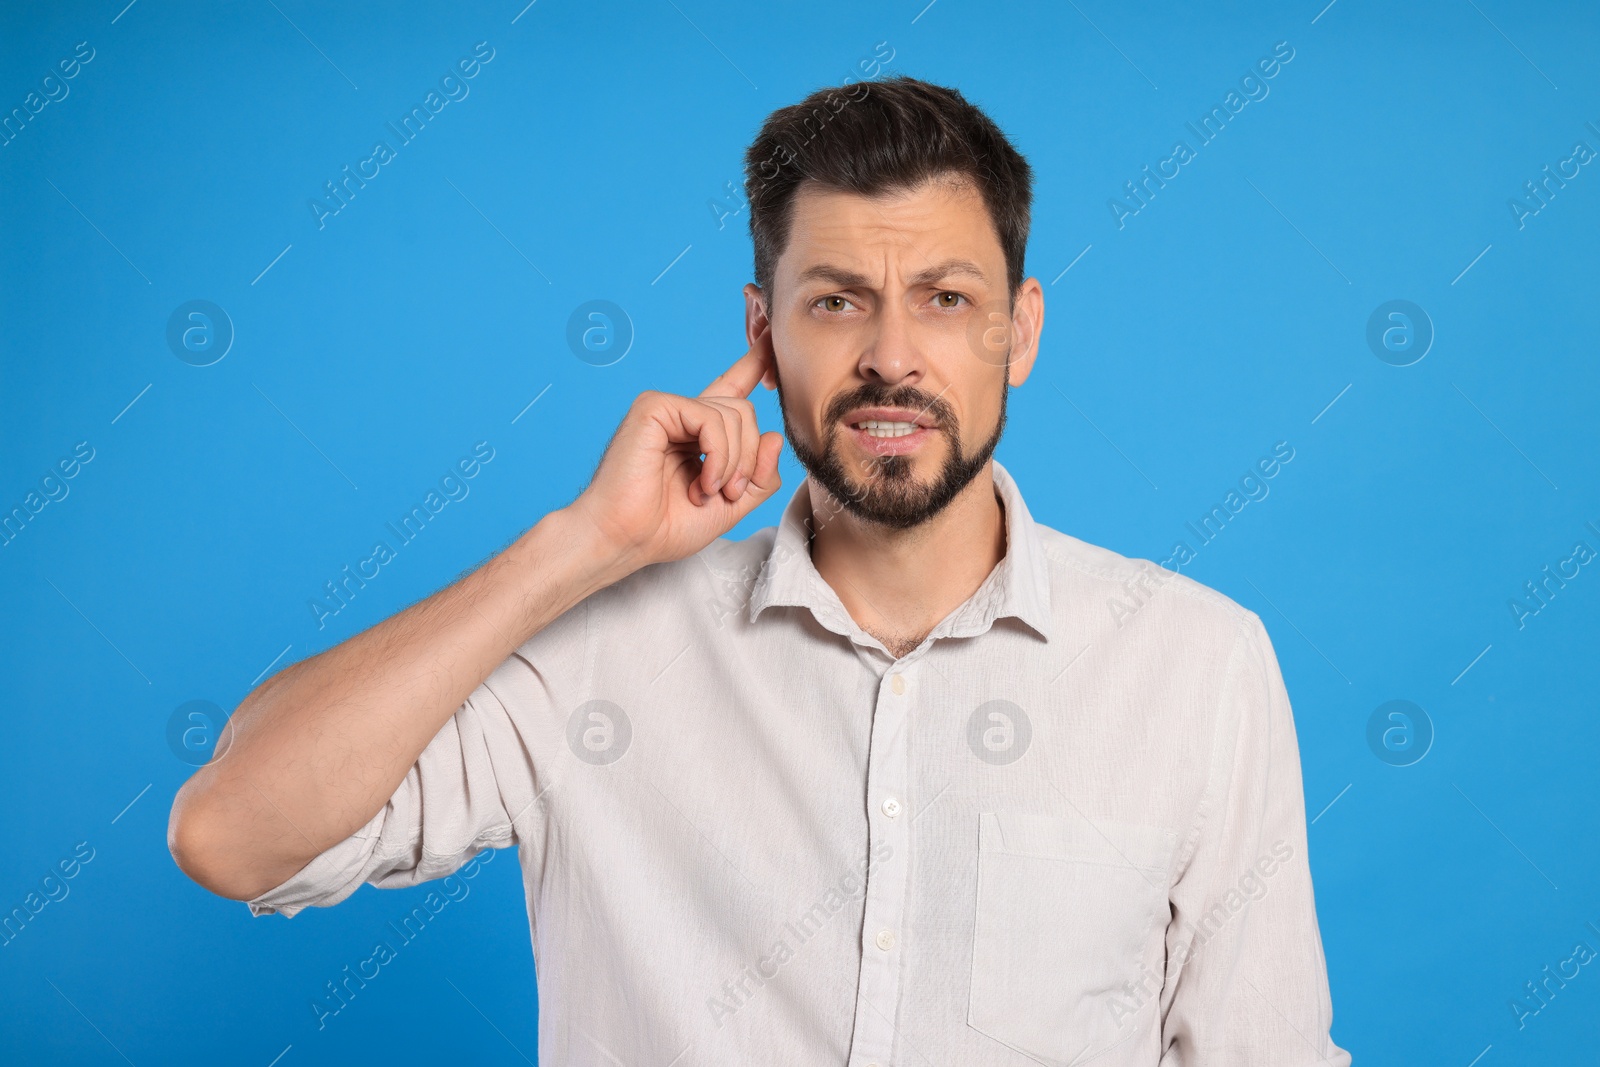 Photo of Man suffering from ear pain on light blue background